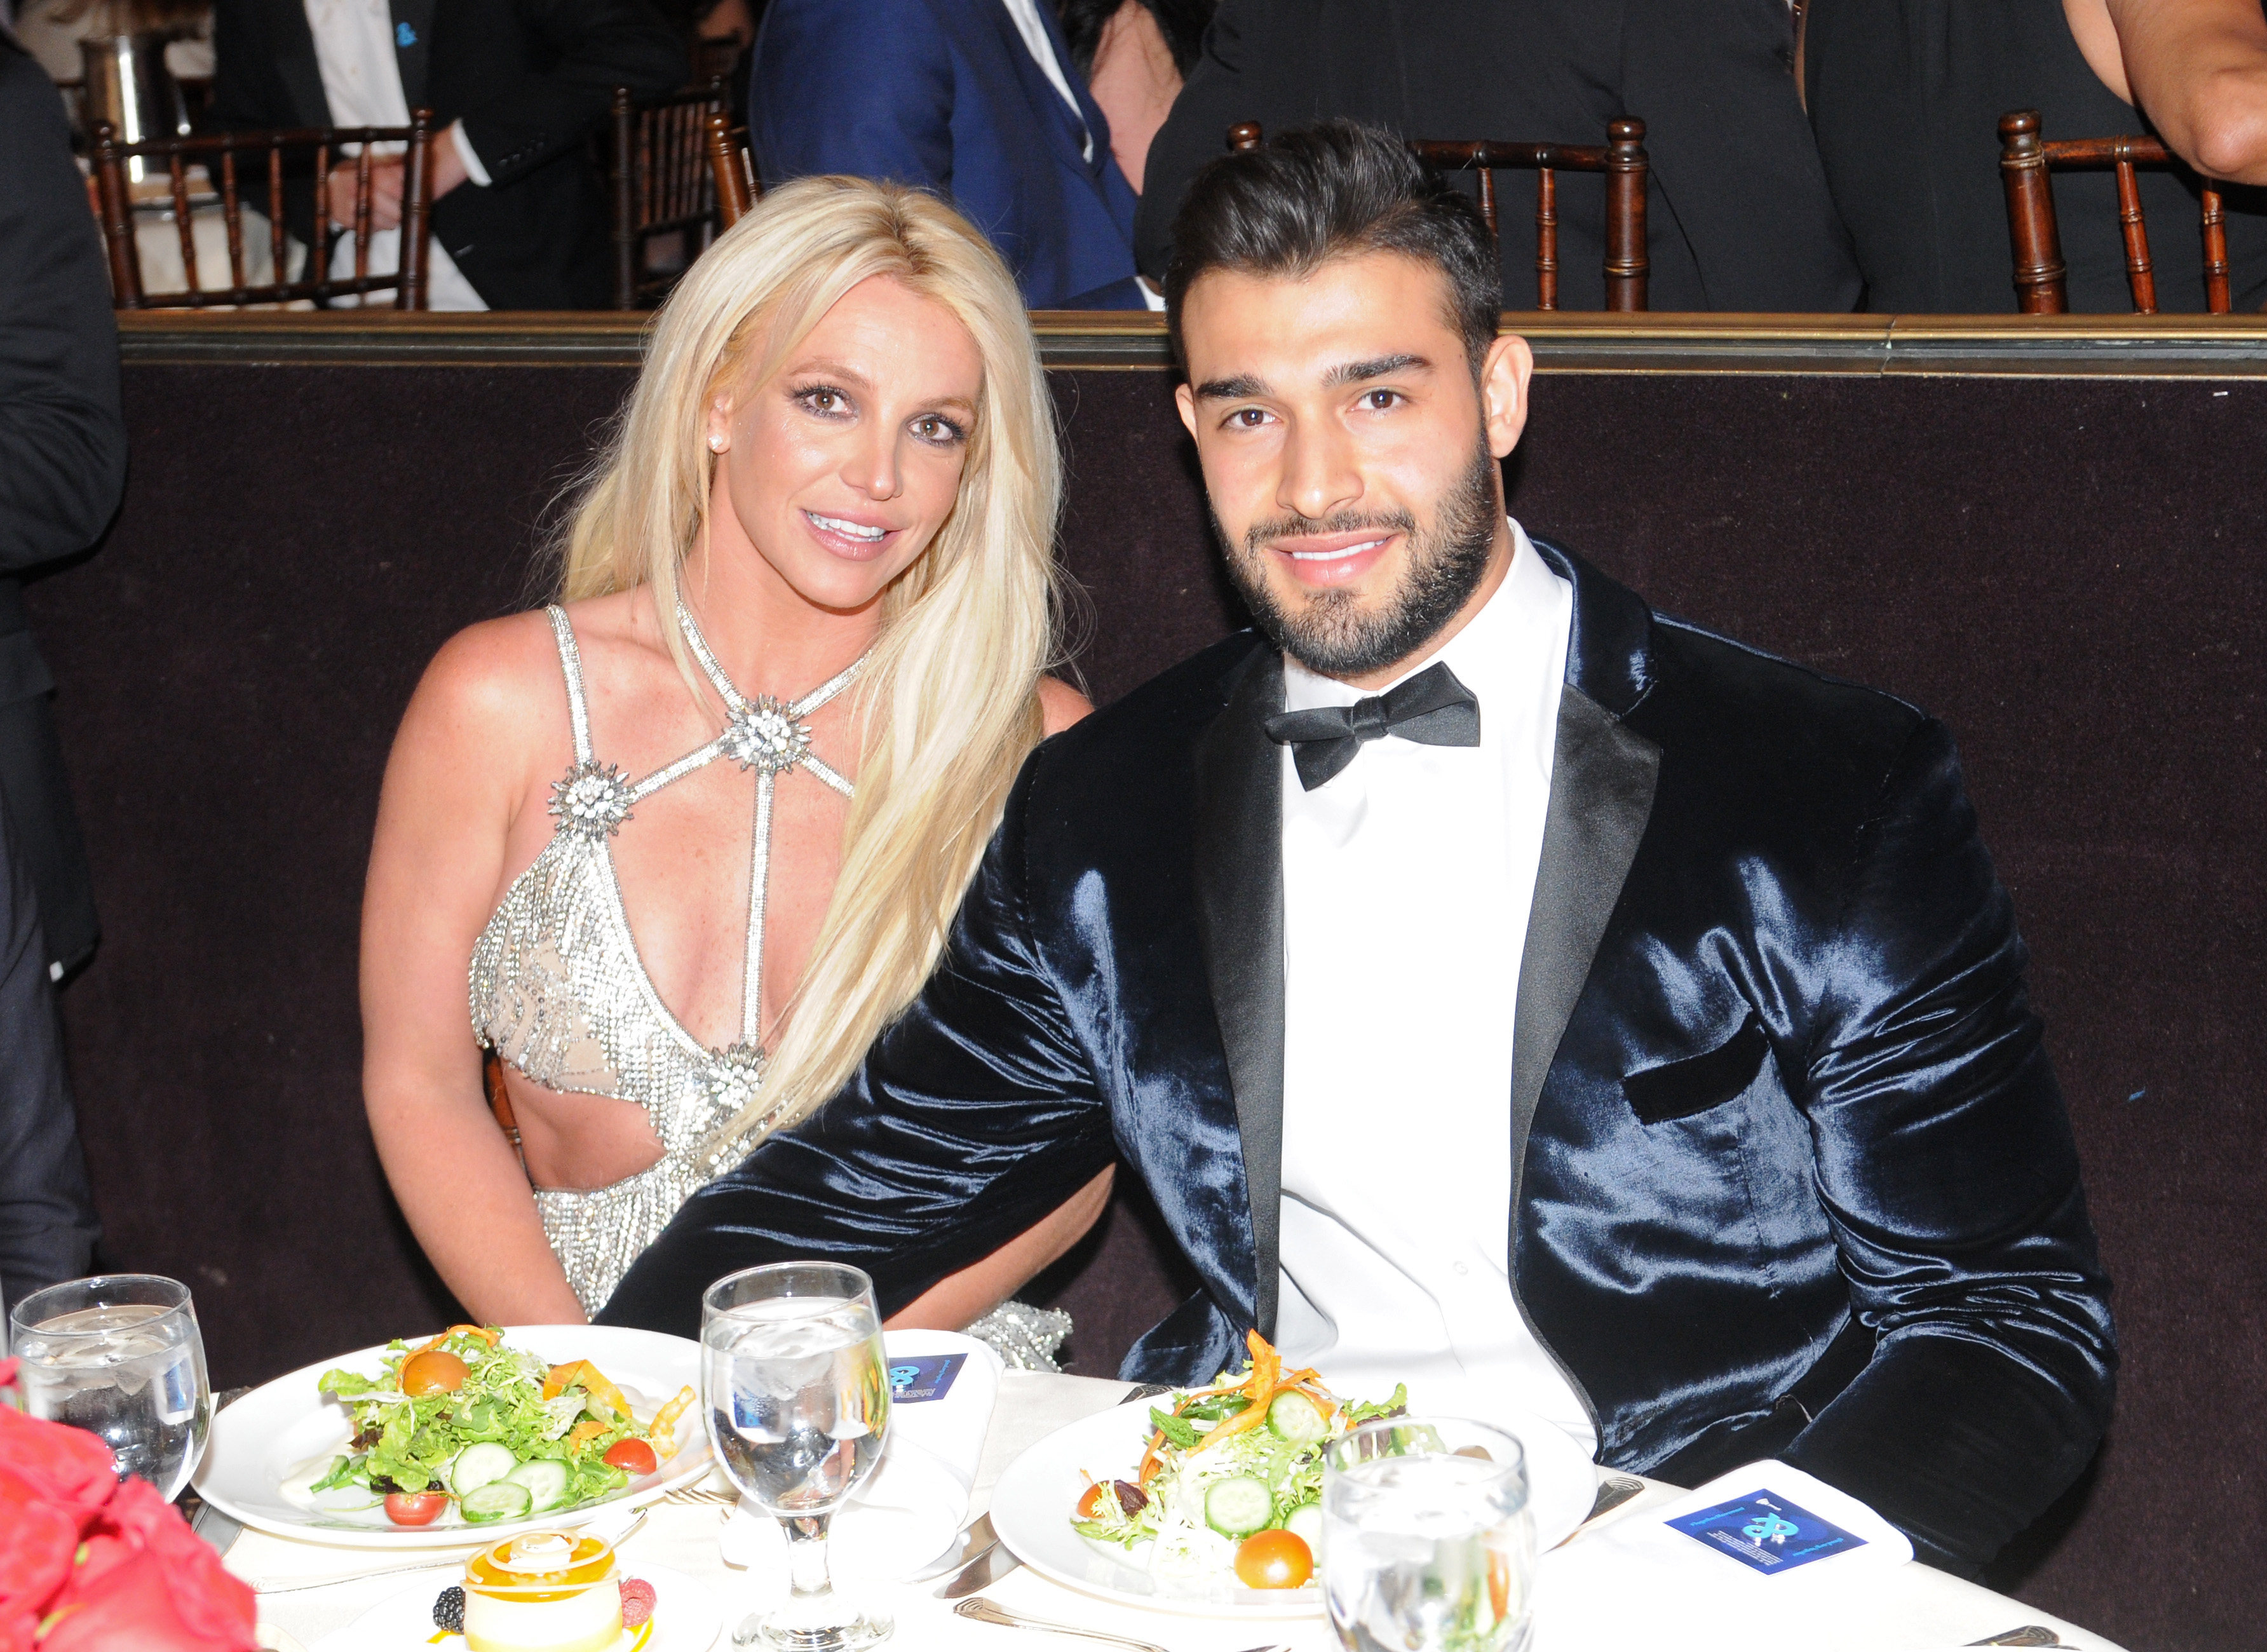 Britney Spears and partner Sam Asghari attend an awards ceremony in 2018 at a hotel in Beverly Hills, California. Photo: Getty Images for GLAAD/TNS